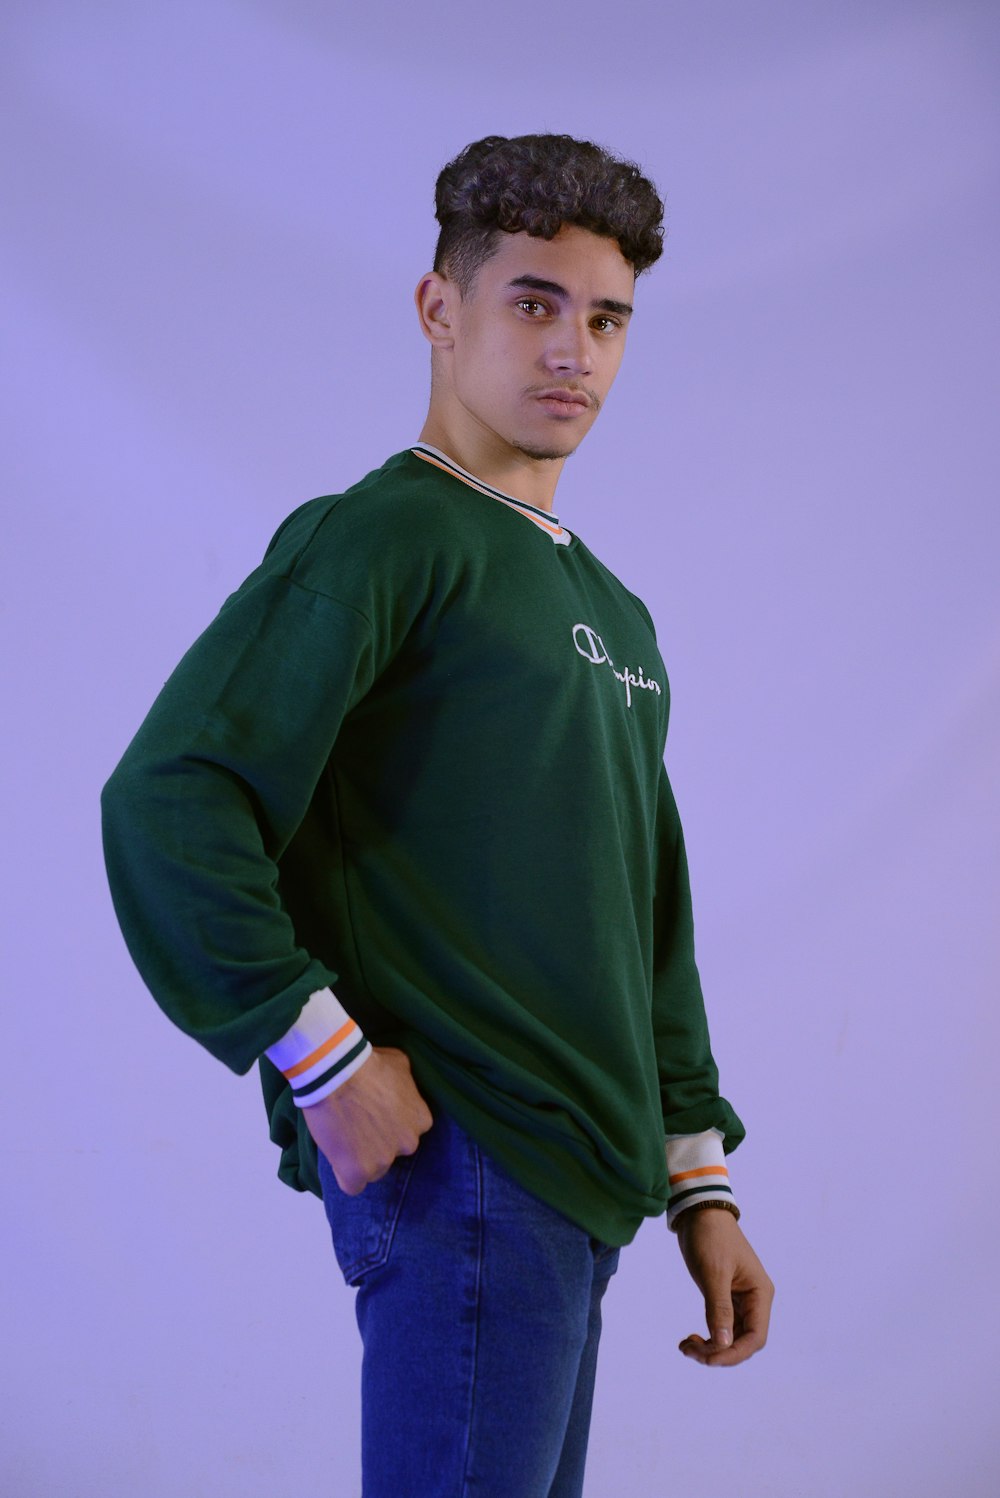 a young man in a green sweatshirt poses for a picture